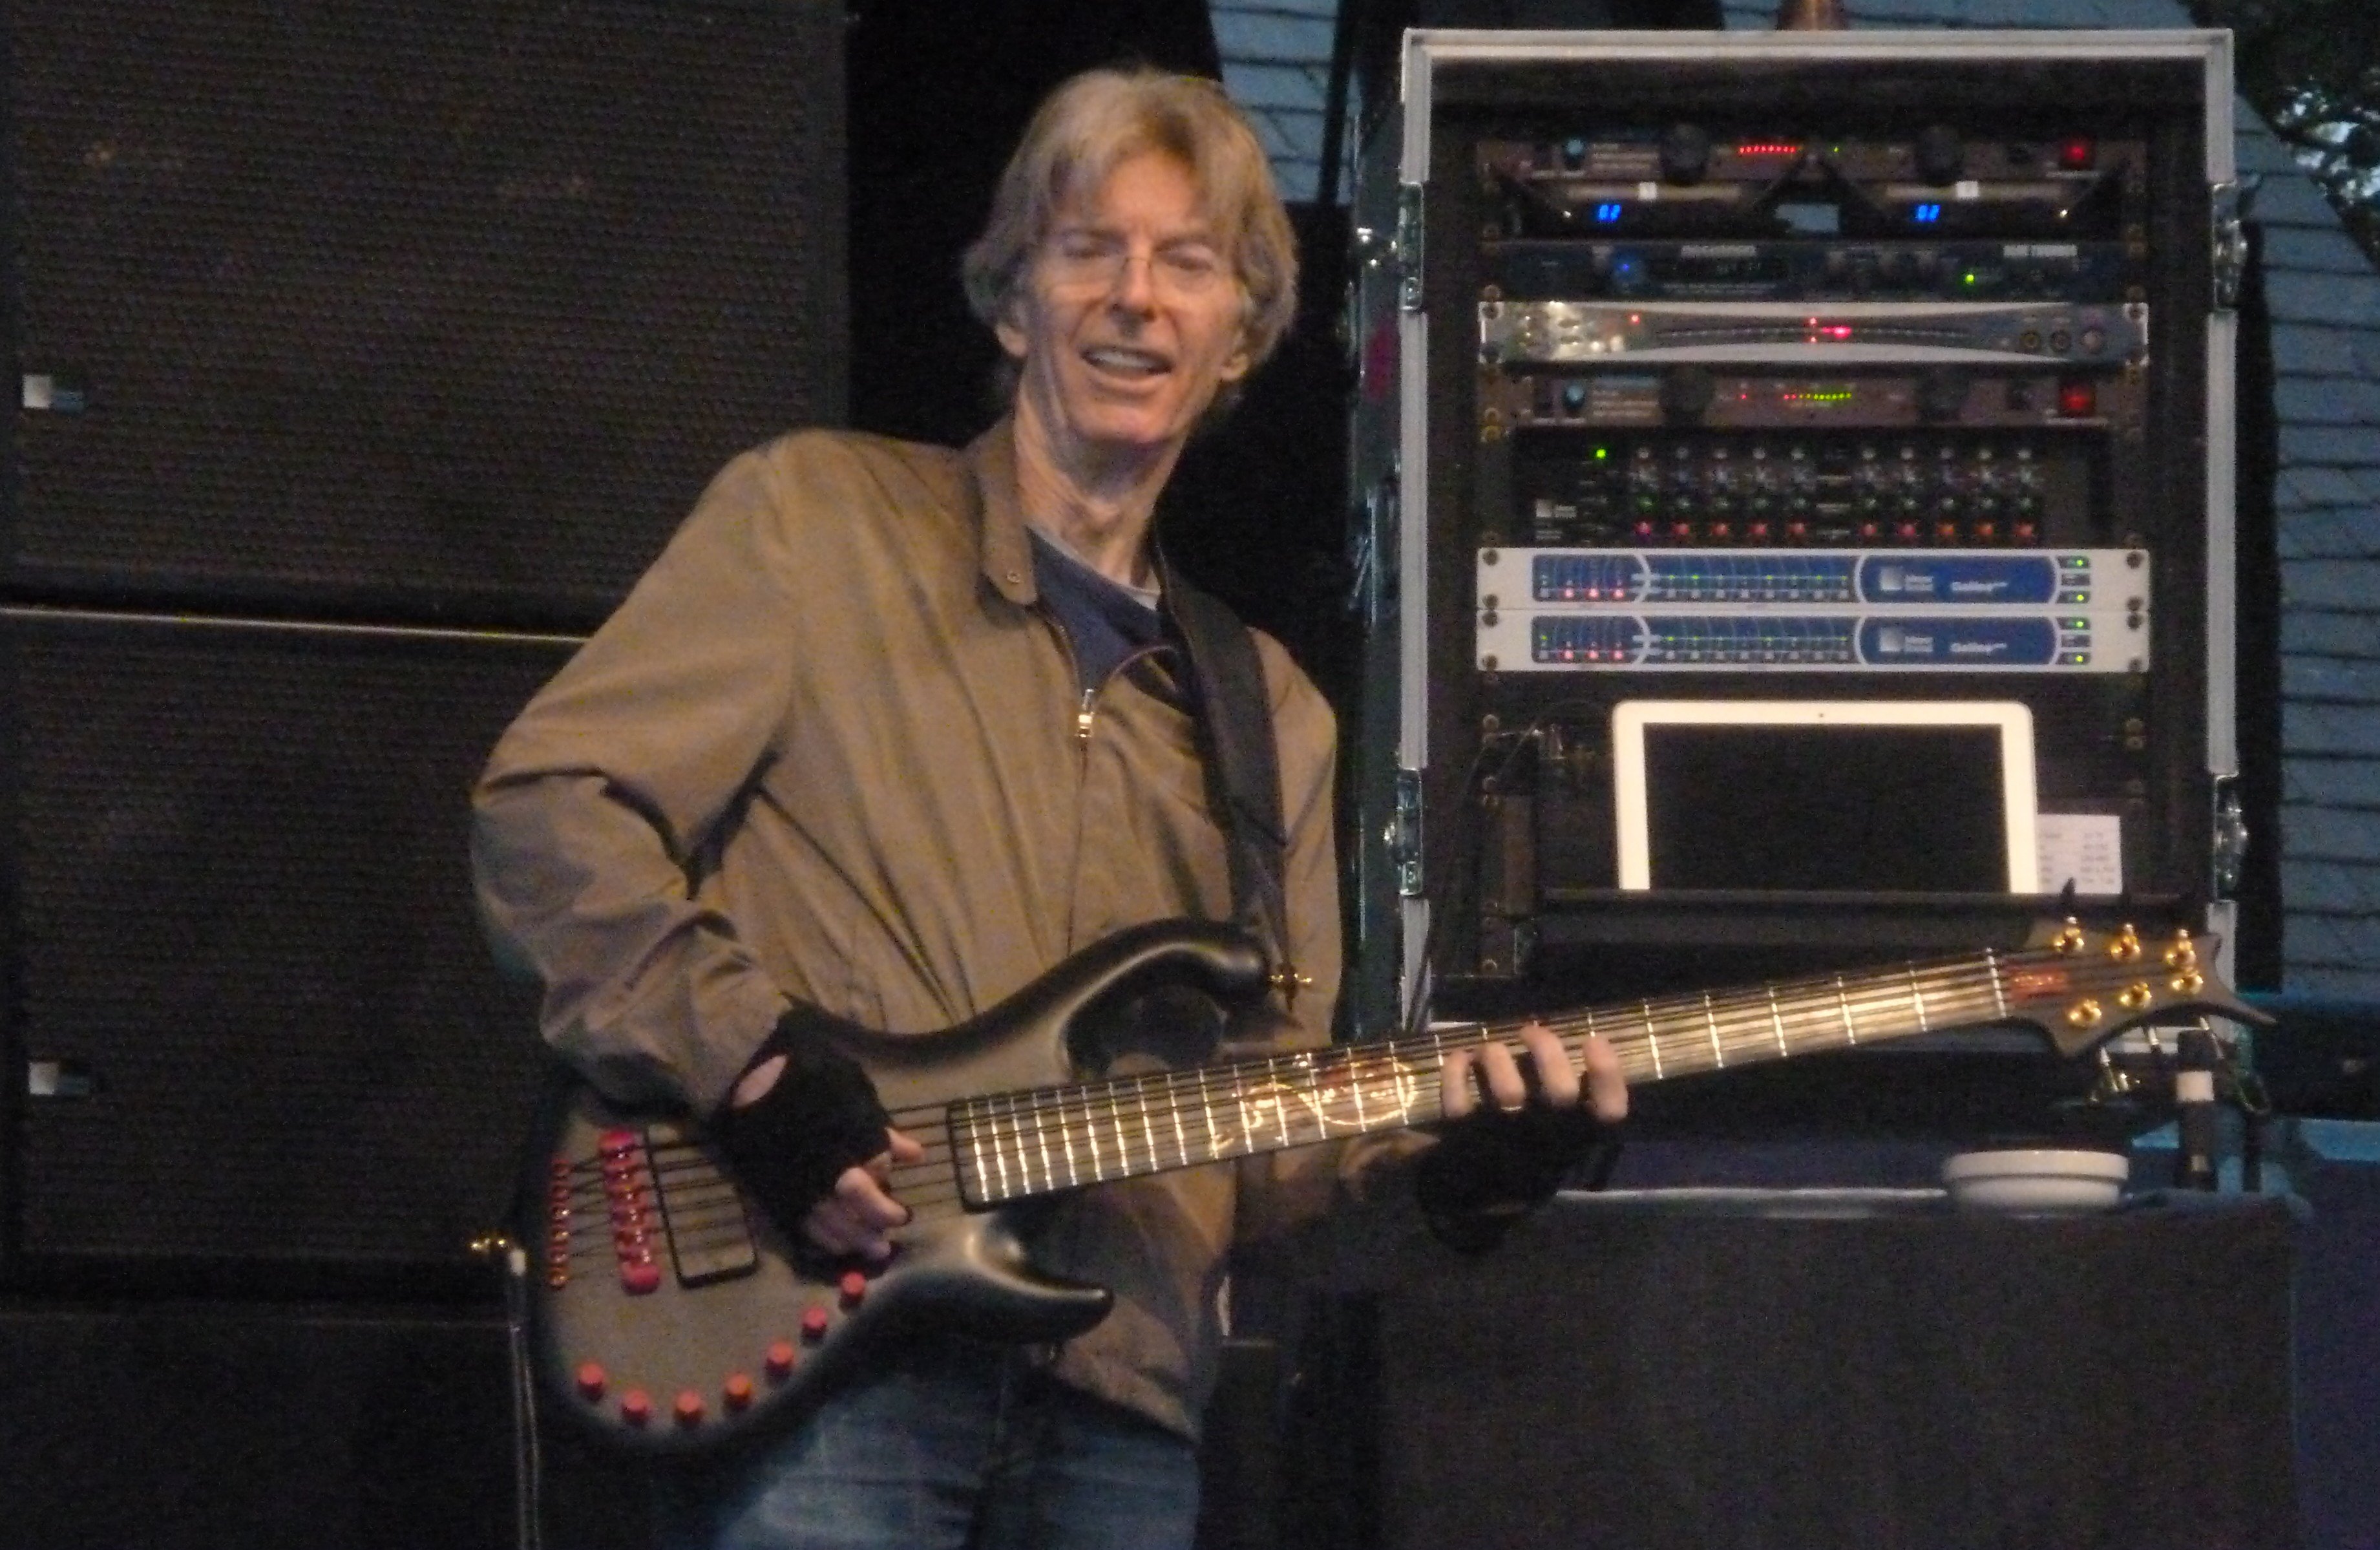 Phil-Lesh-Central-Park-Rumsey-Playfield-2014